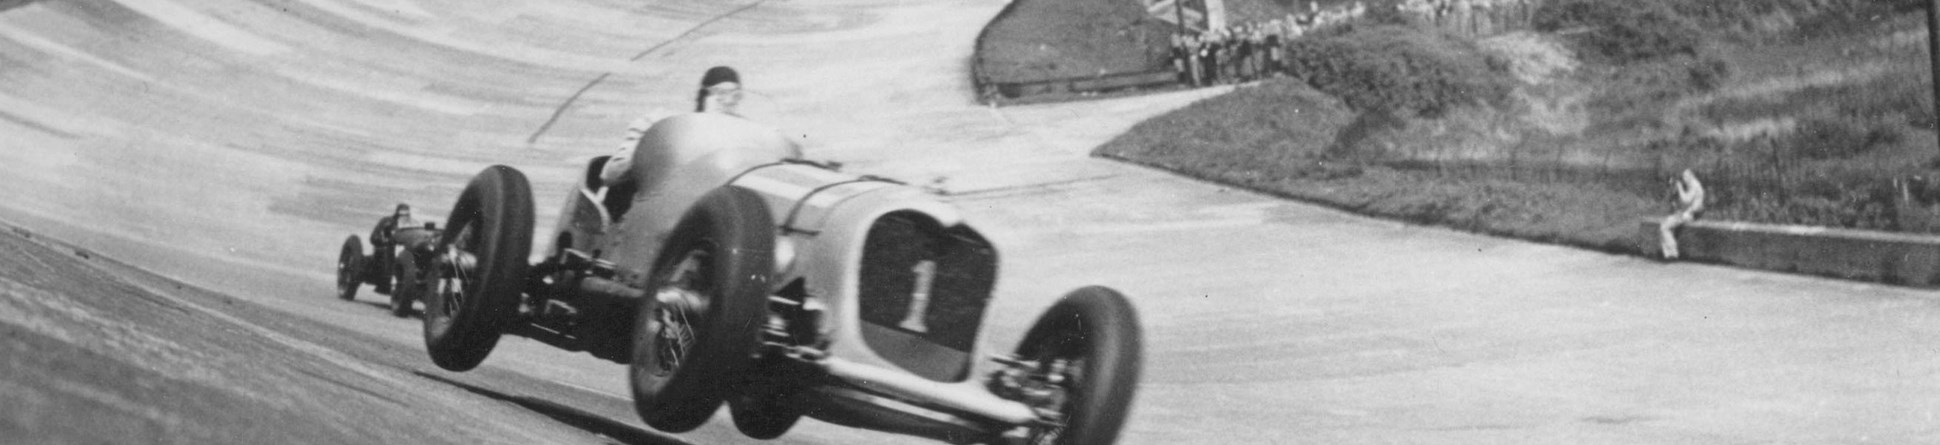 Black and white image of a car lifted off the track at Brooklands as it takes a fast corner.